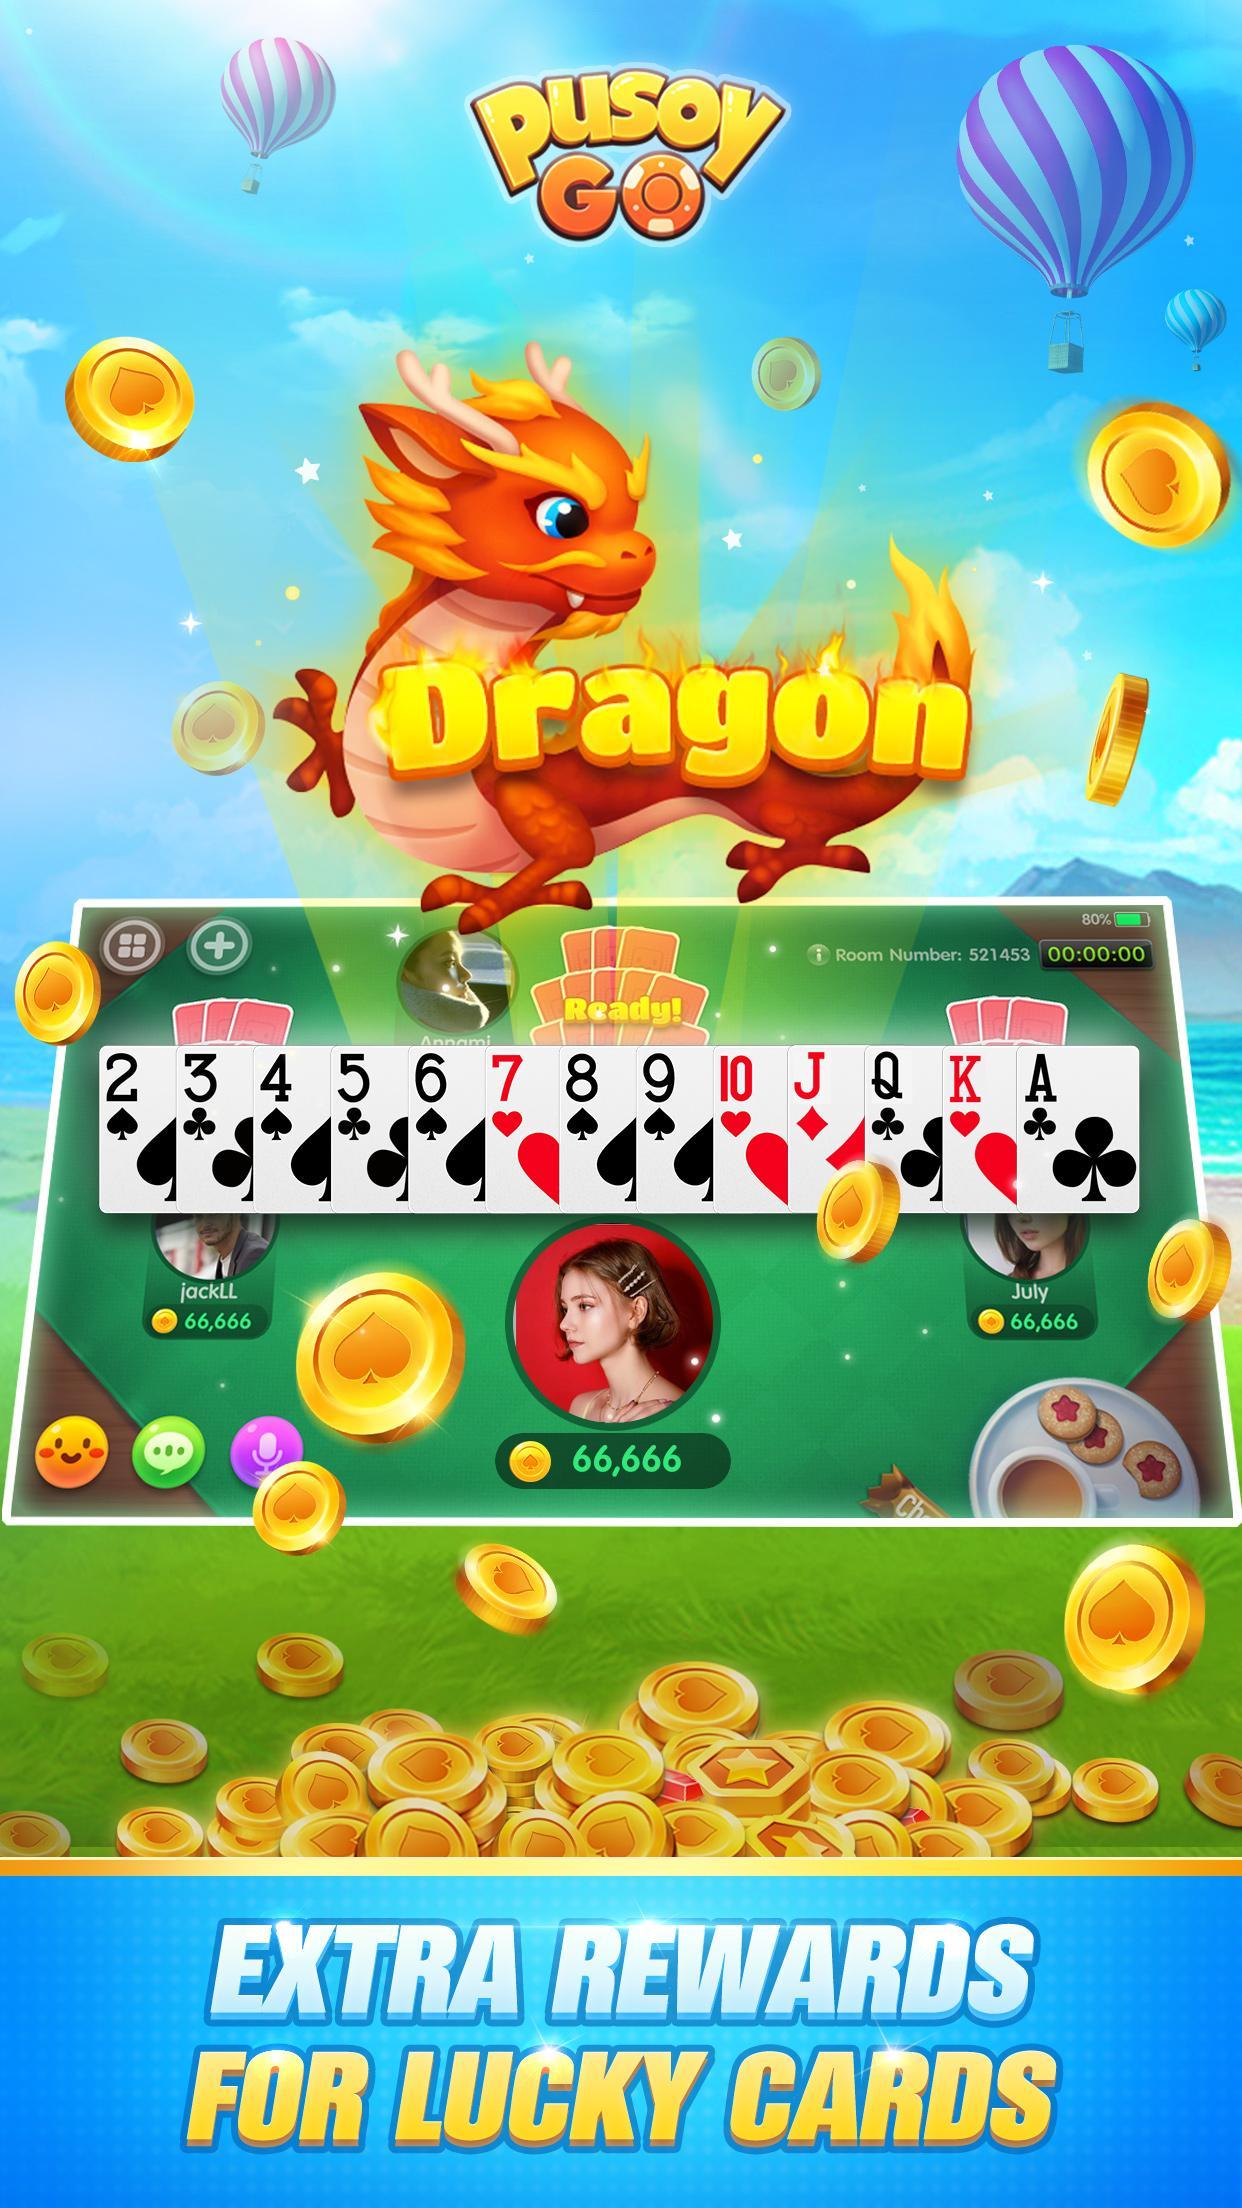 Pusoy Go Free Online Chinese Poker(13 Cards game) 2.9.20 Screenshot 6